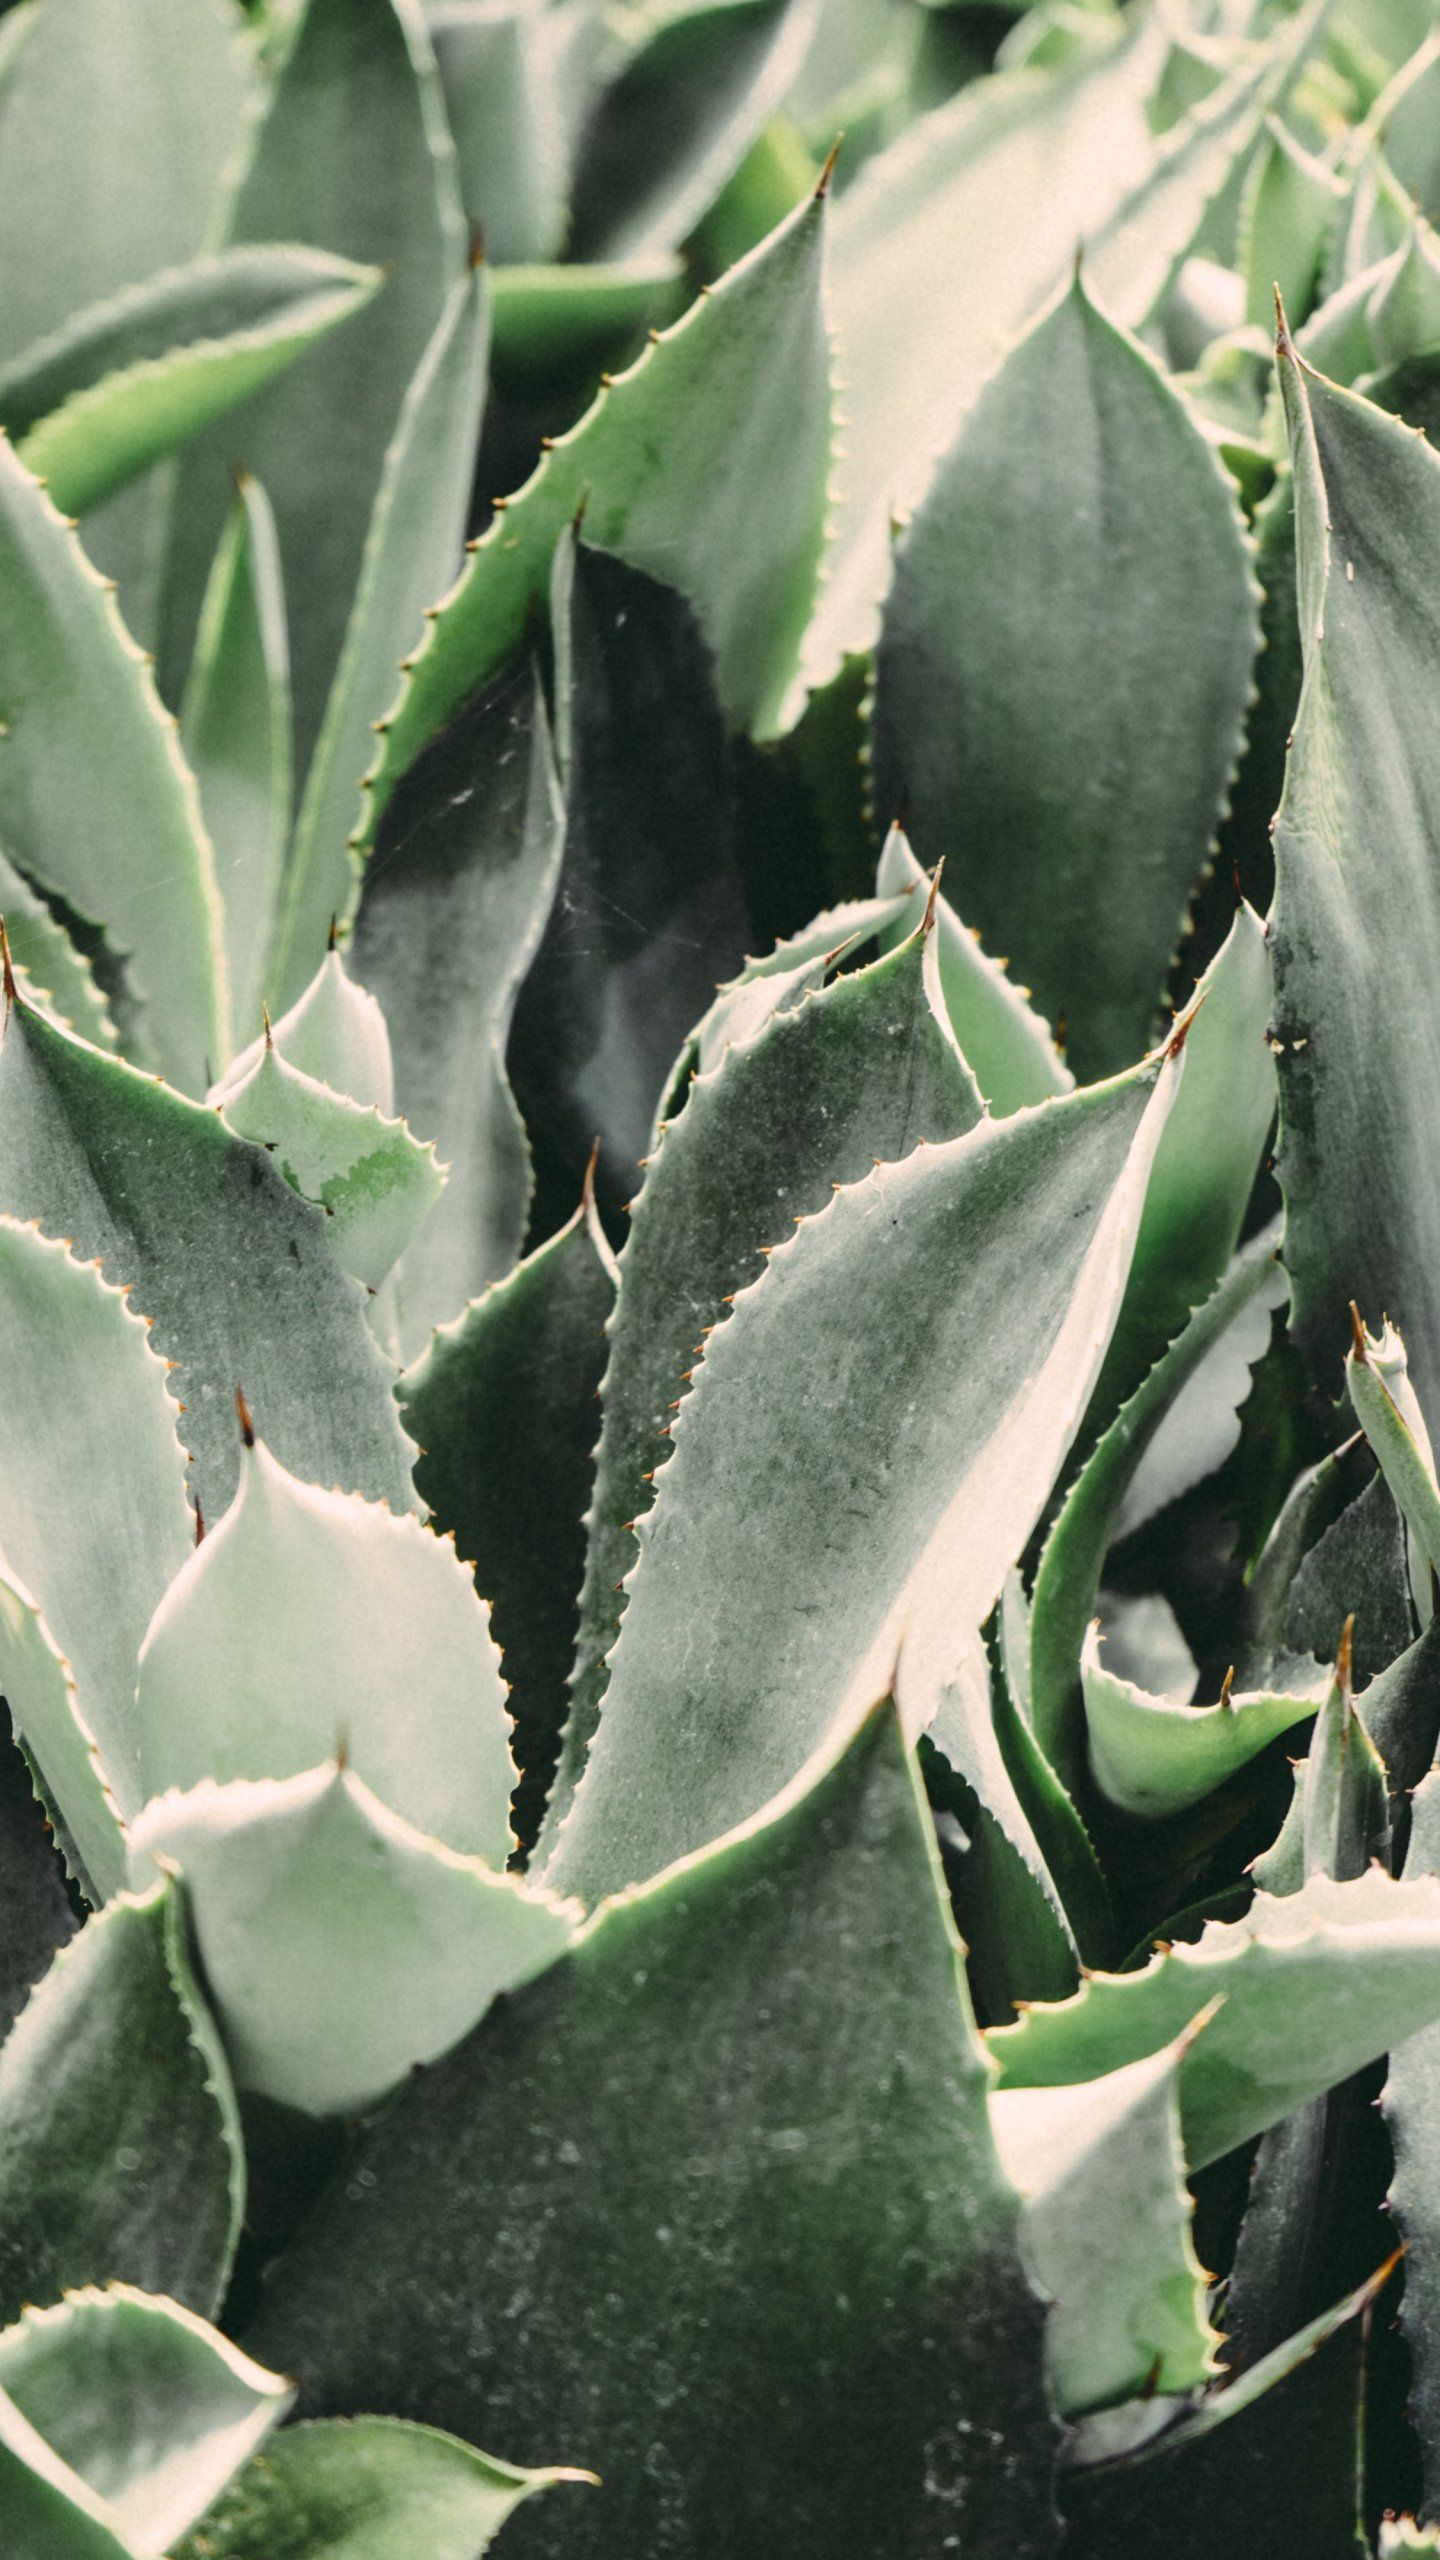 A close up of a green plant with sharp leaves. - Cactus